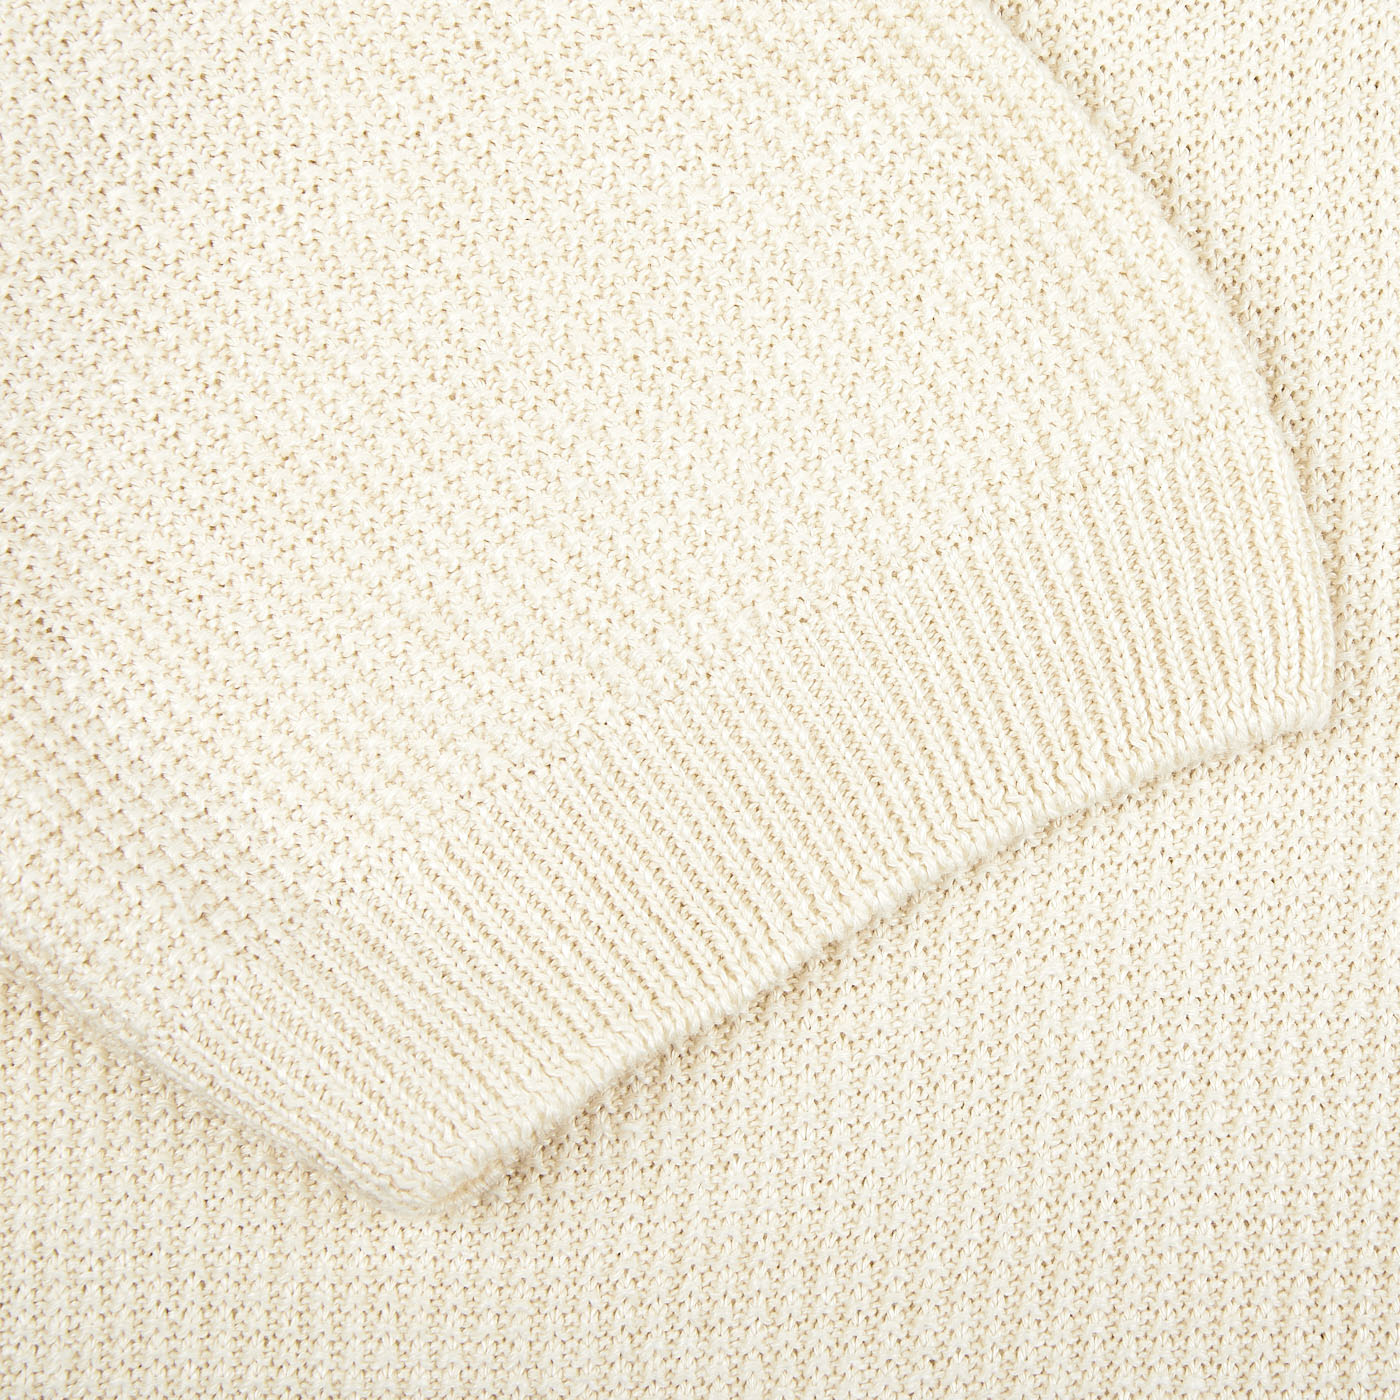 A close up image of a Cream Beige Cotton Linen Polo Shirt made with Gran Sasso thread.